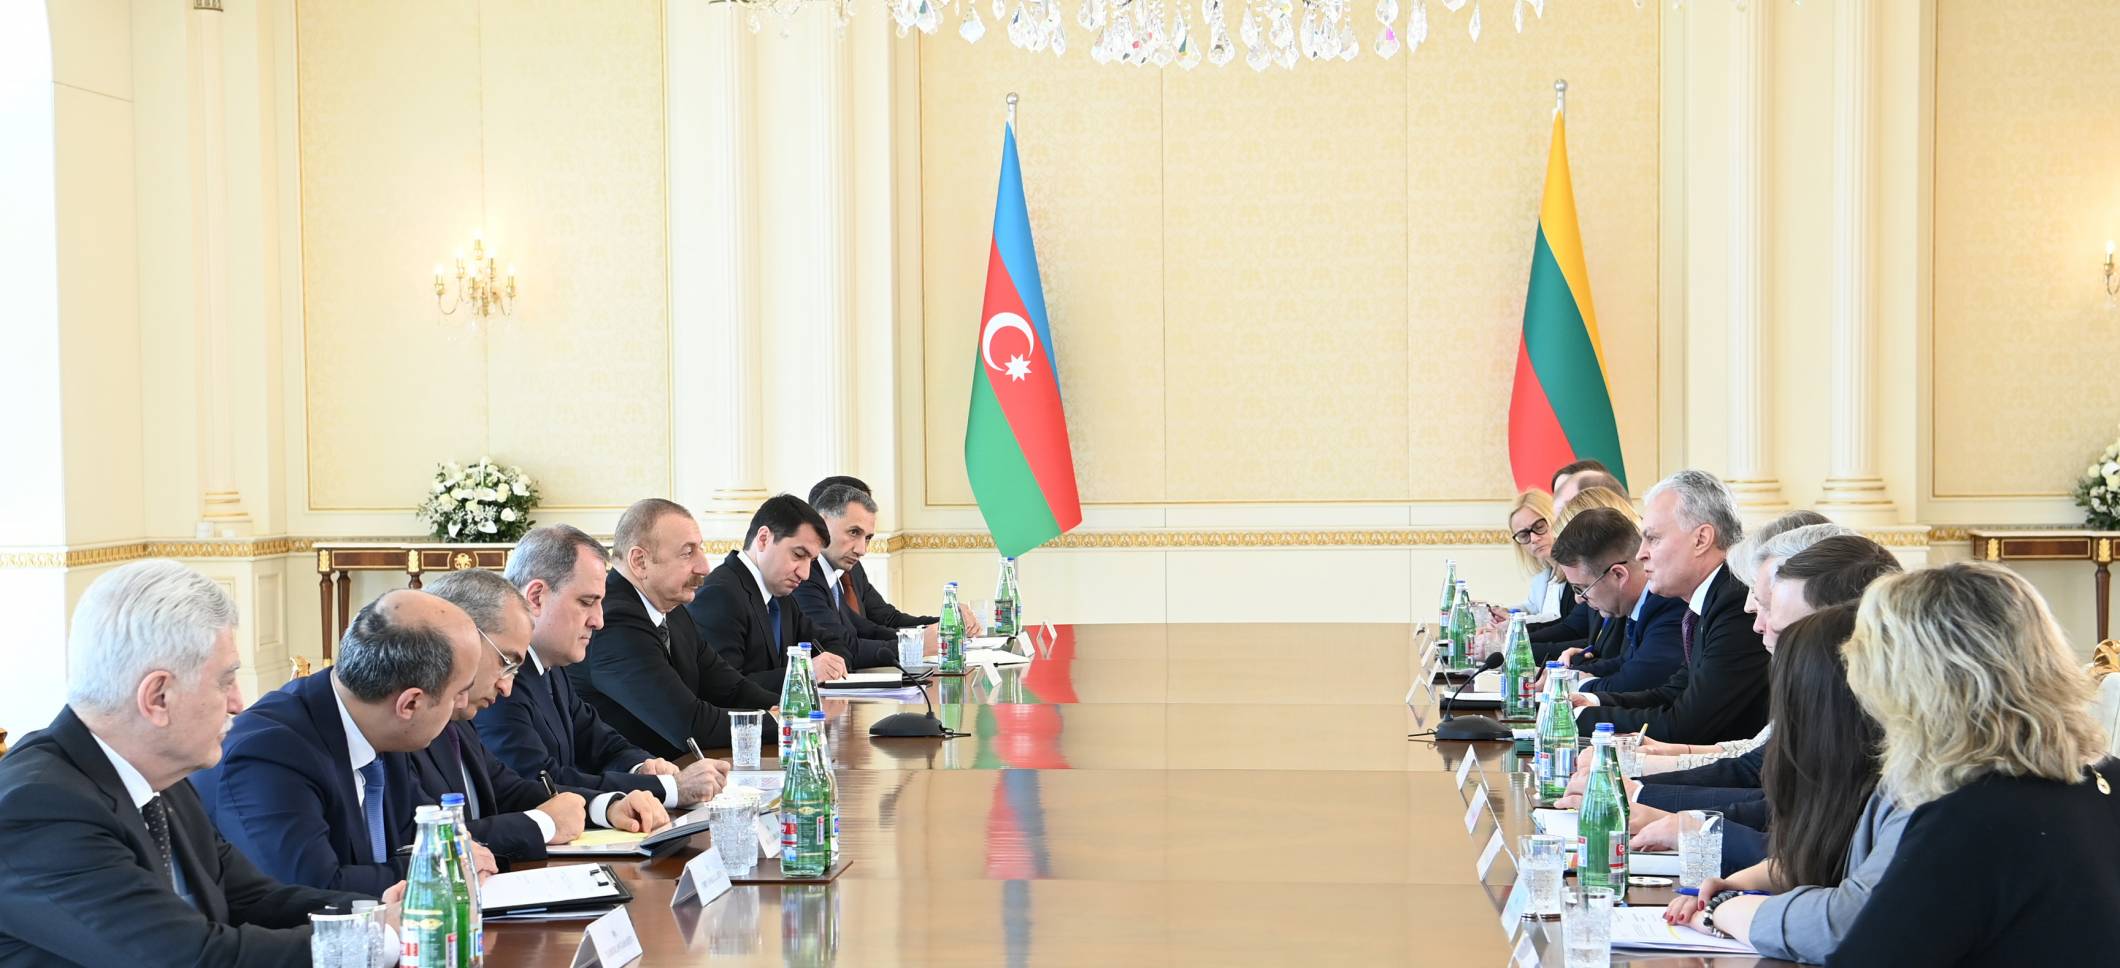 Ilham Aliyev has held an expanded meeting with President of the Republic of Lithuania Gitanas Nausėda